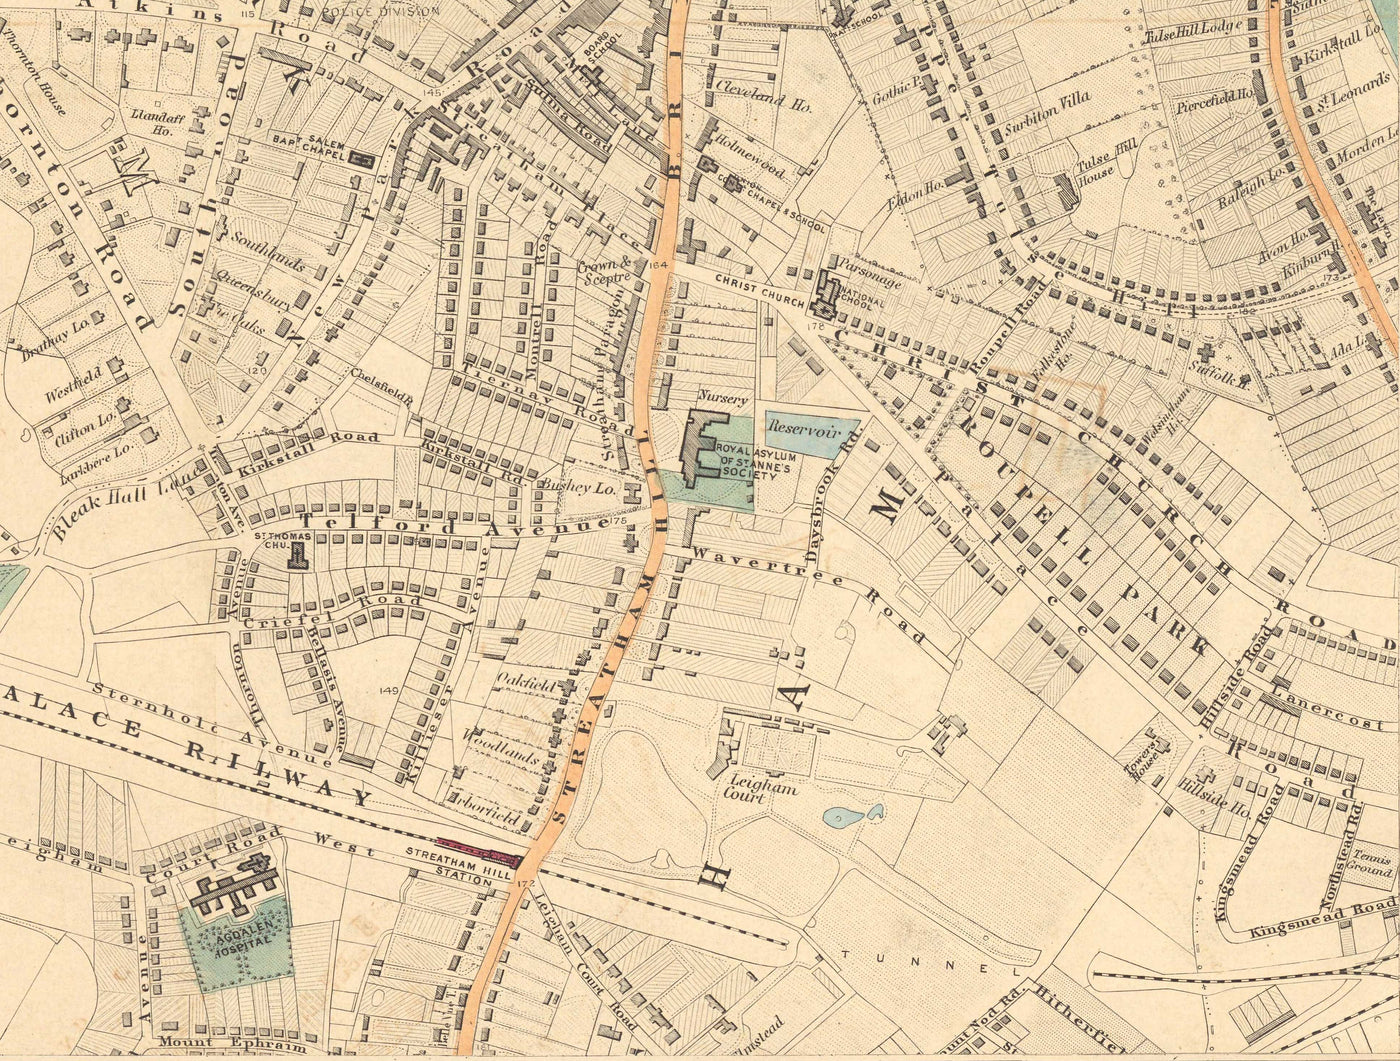 Old Colour Map of South London, 1891 - Clapham, Balham, Brixton, Tooting, Common, Park - SW2, SW4, SW12, SW17, SW11